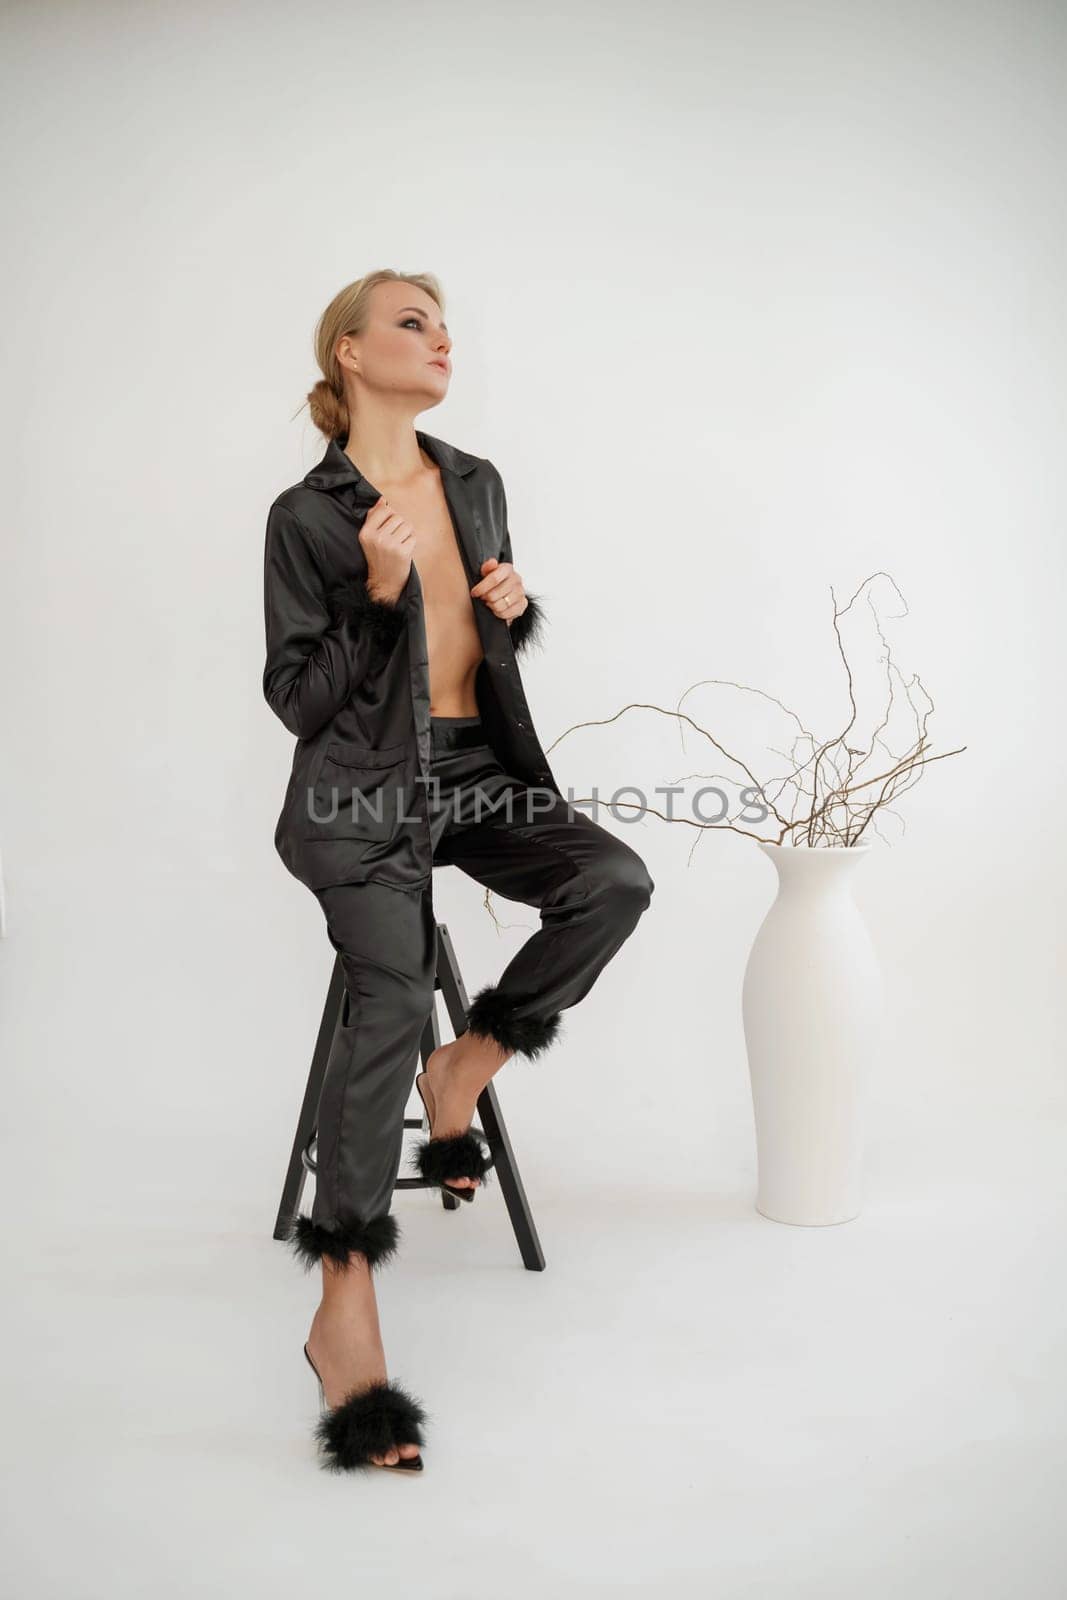 Woman glamorous pajamas. A beautiful blonde in black pajamas sits relaxed on a chair in black pajamas with feathers on a white background. Photo shoot in the studio, advertising pajamas